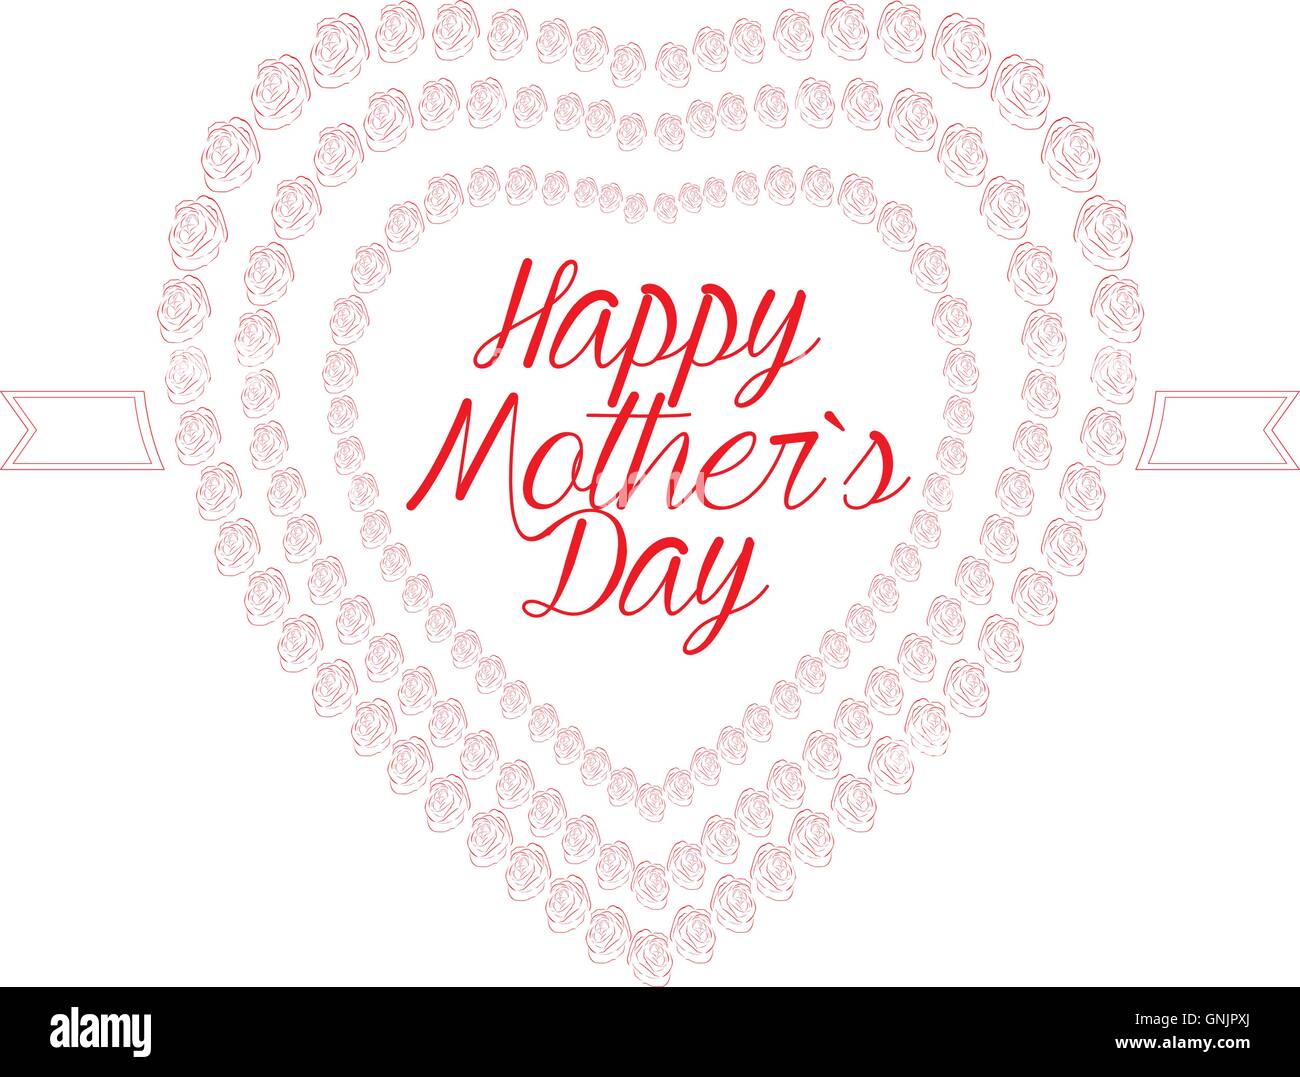 Isolated heart composed by roses and text on a white background for mother's day celebrations Stock Vector